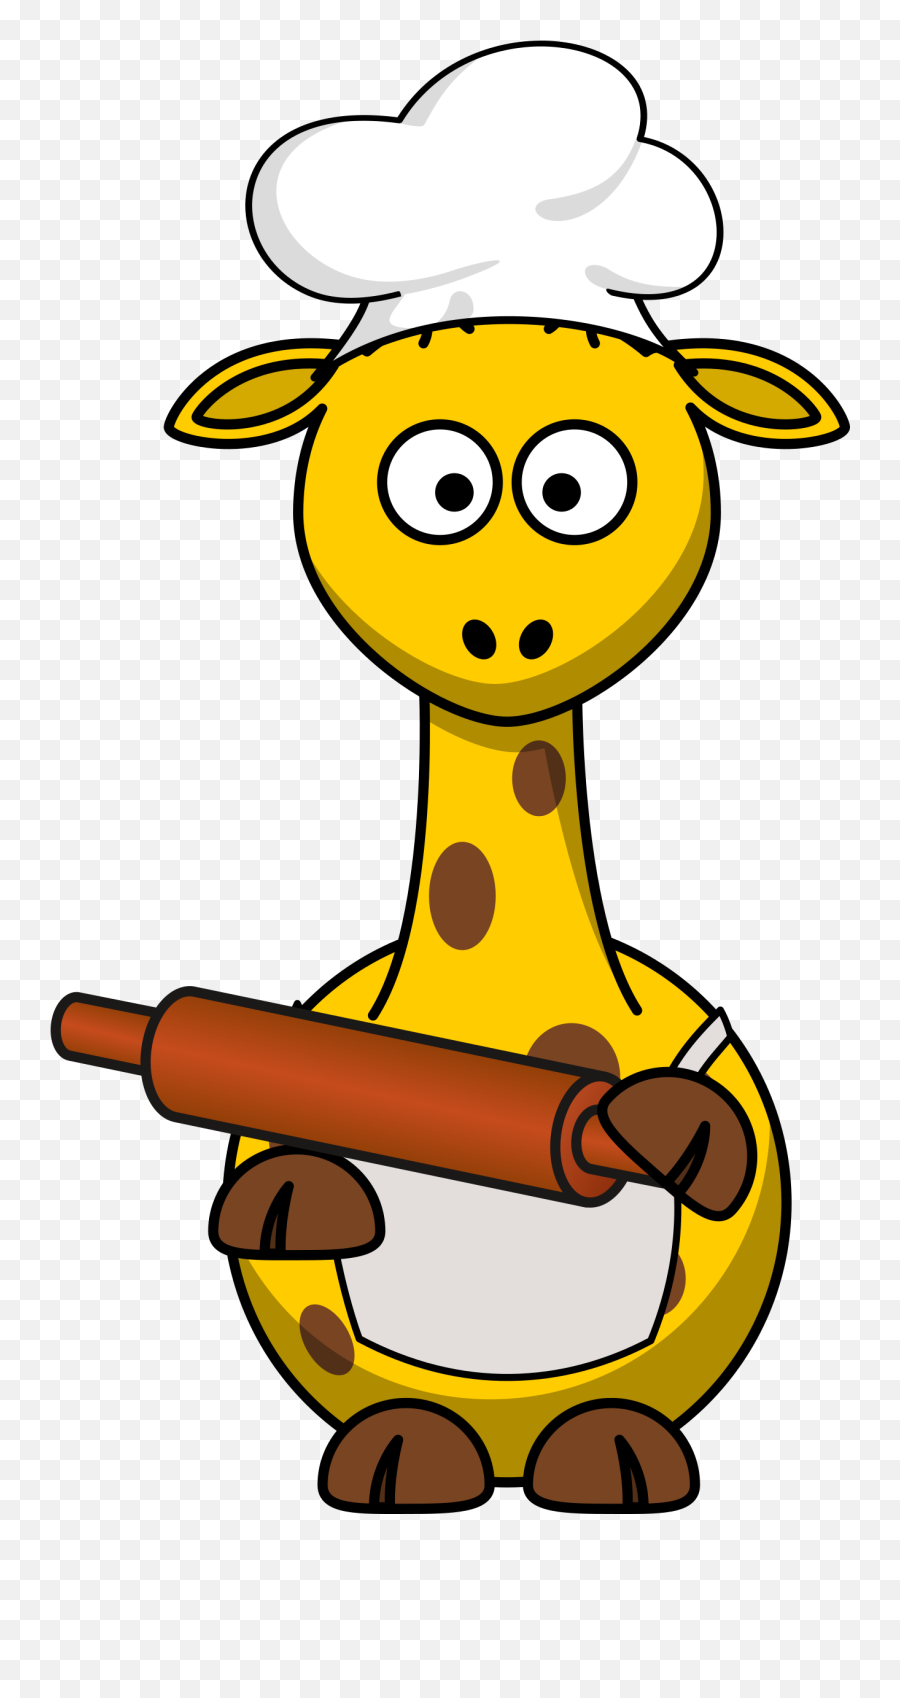 Clipart Images Bakery Clipart Images - Giraffe Head Clipart Emoji,Bakery Clipart